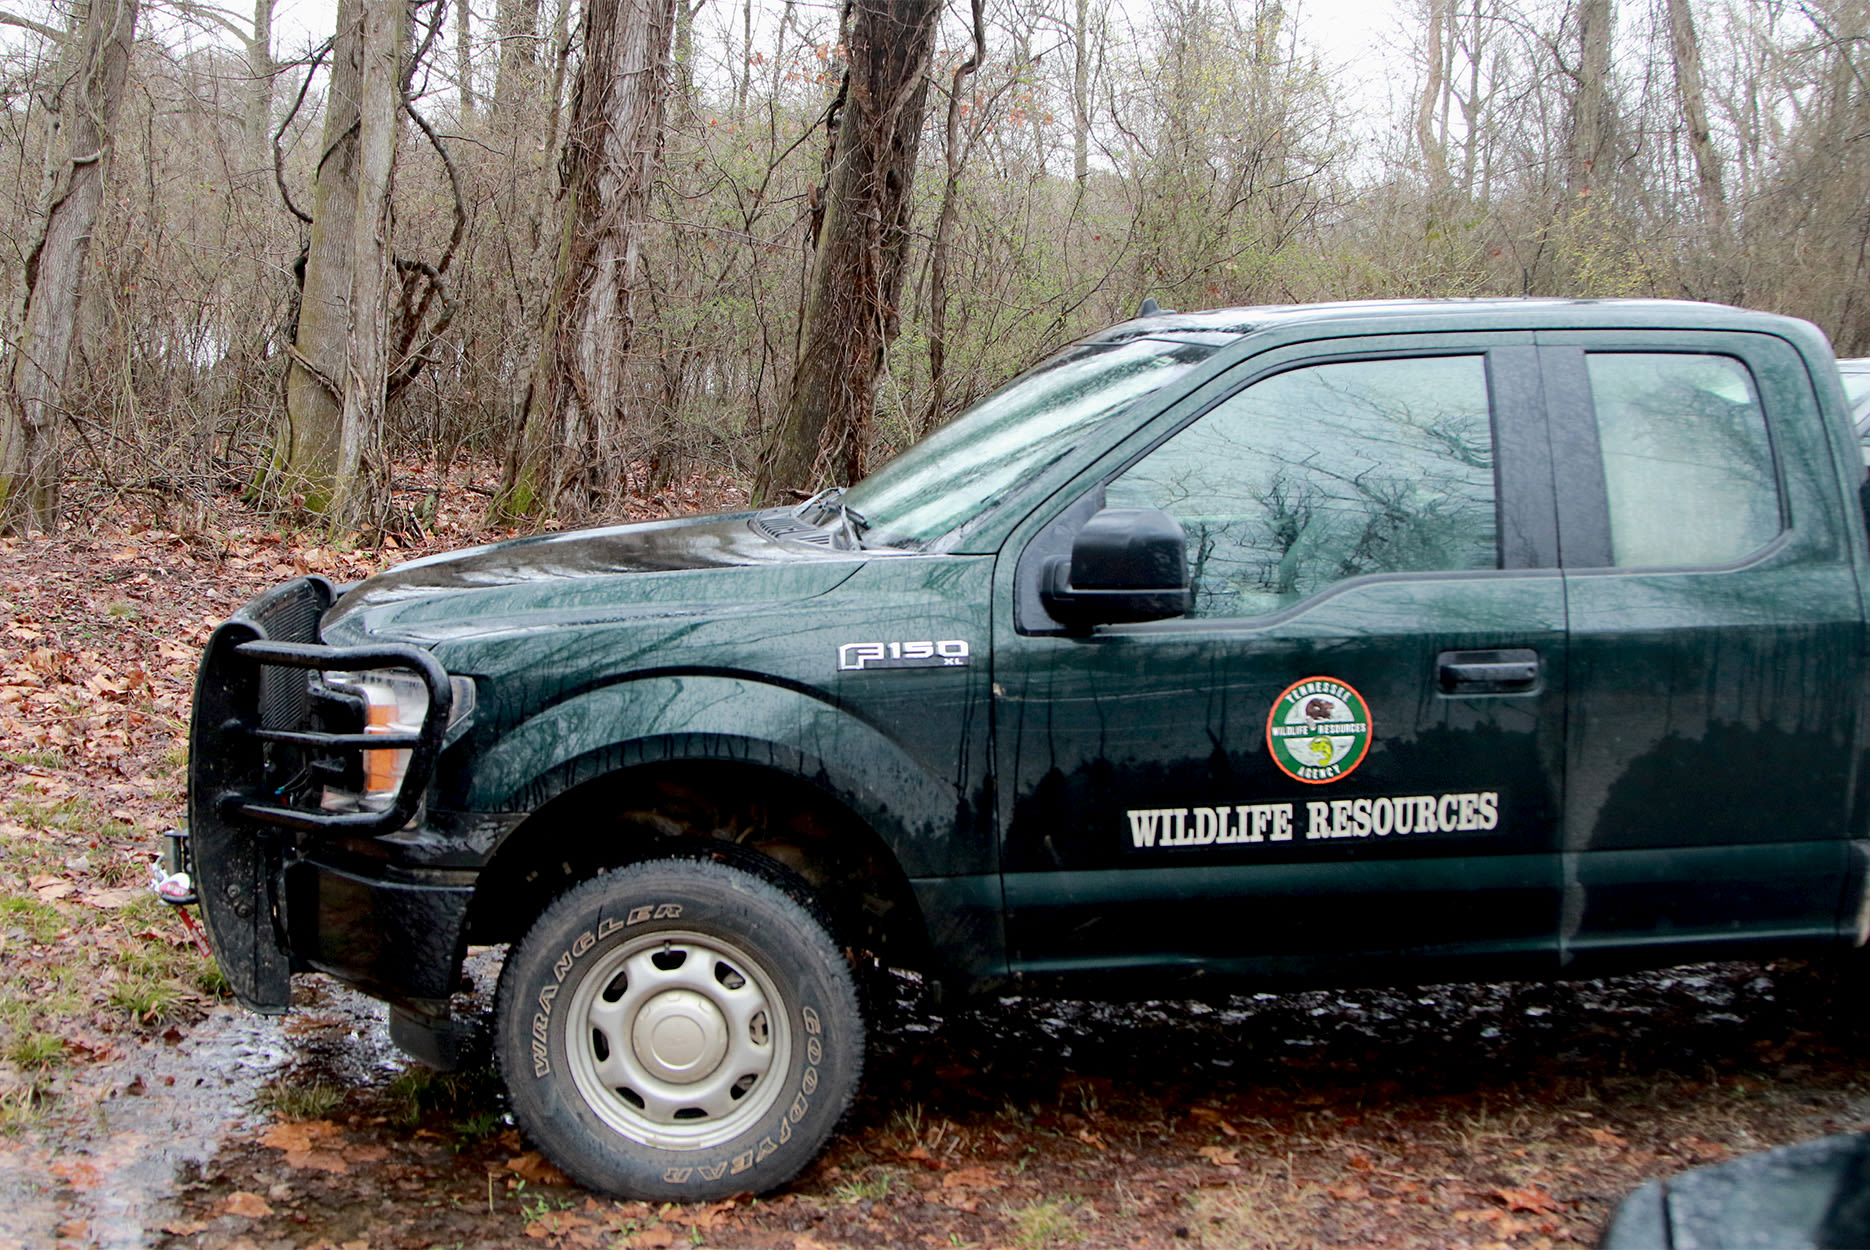 Tennessee Judges Reign in Game Wardens, Declaring Warrantless Searches on Private Land Unconstitutional